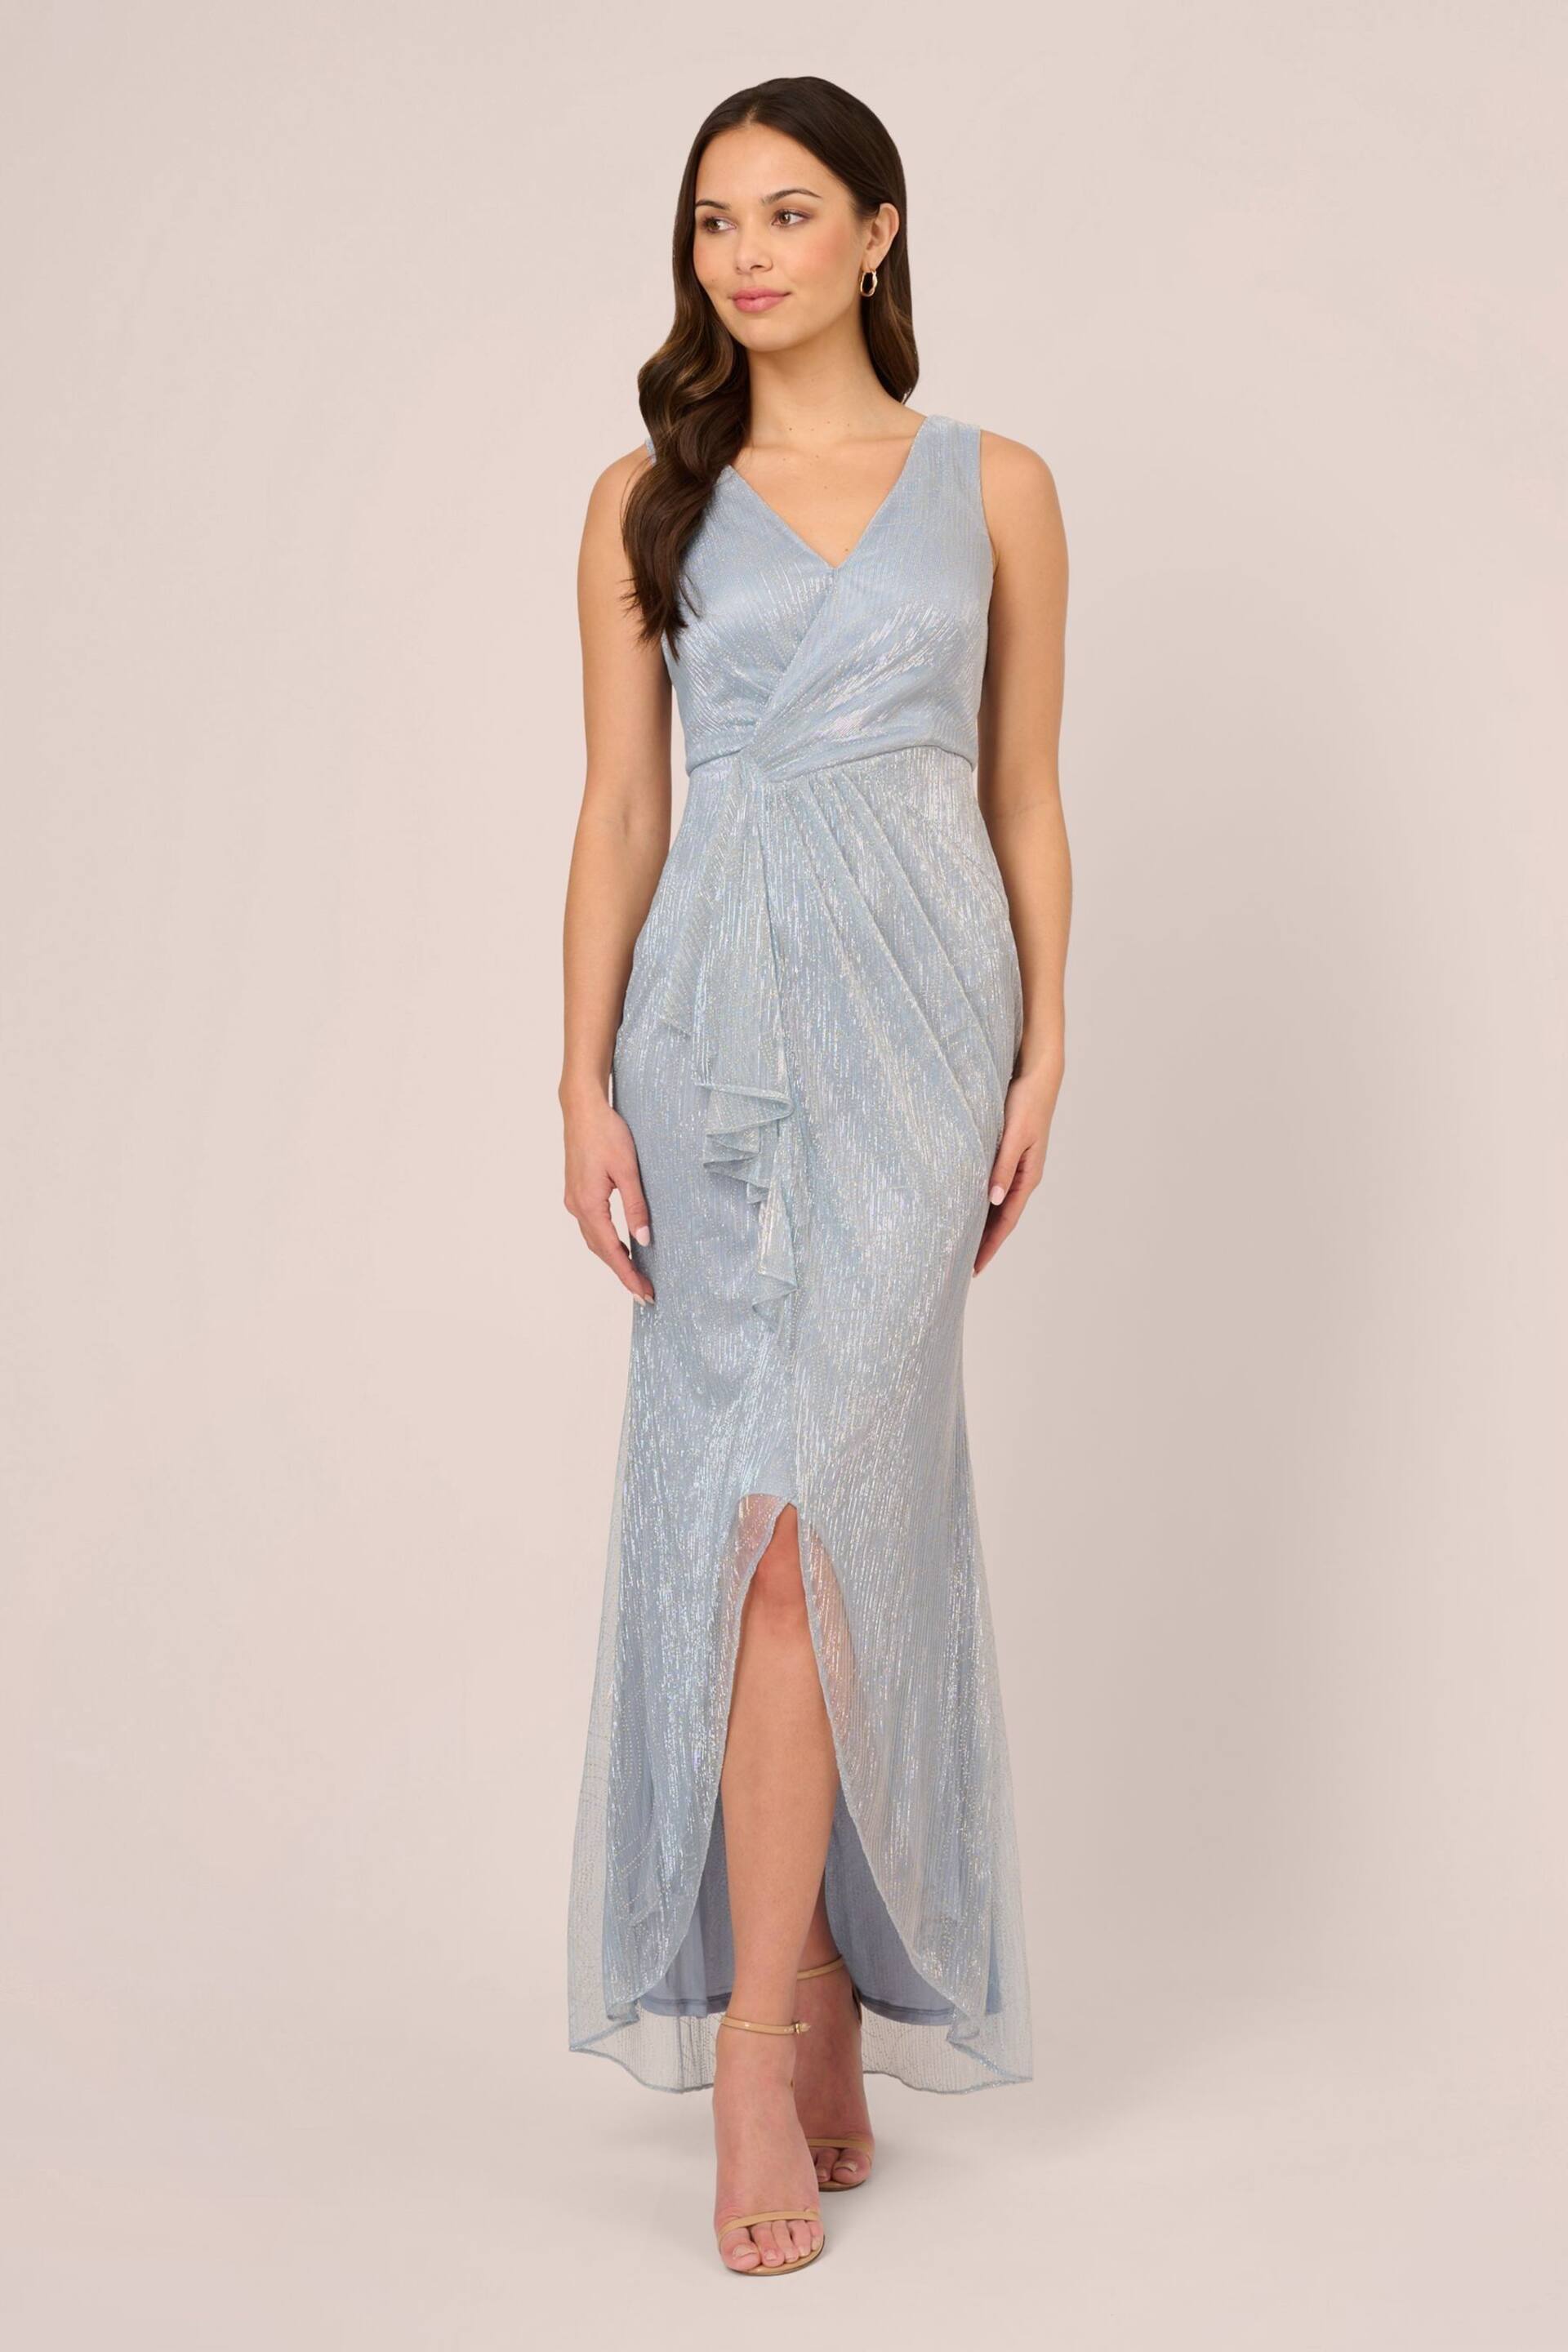 Adrianna Papell Blue Metallic Mesh Cascade Gown - Image 1 of 7